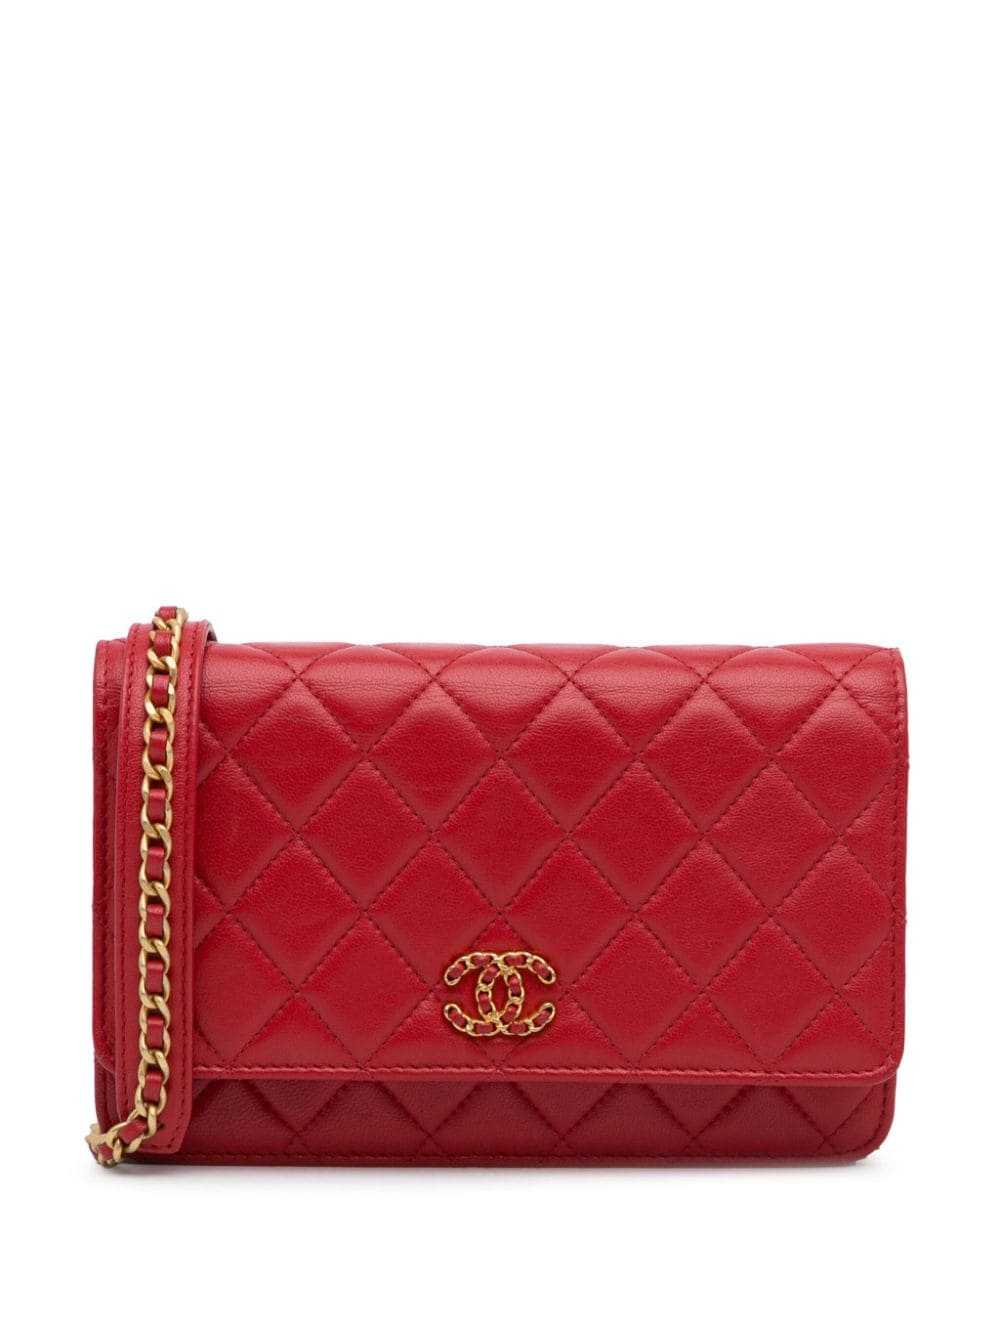 CHANEL Pre-Owned 2019 quilted wallet on chain - R… - image 1